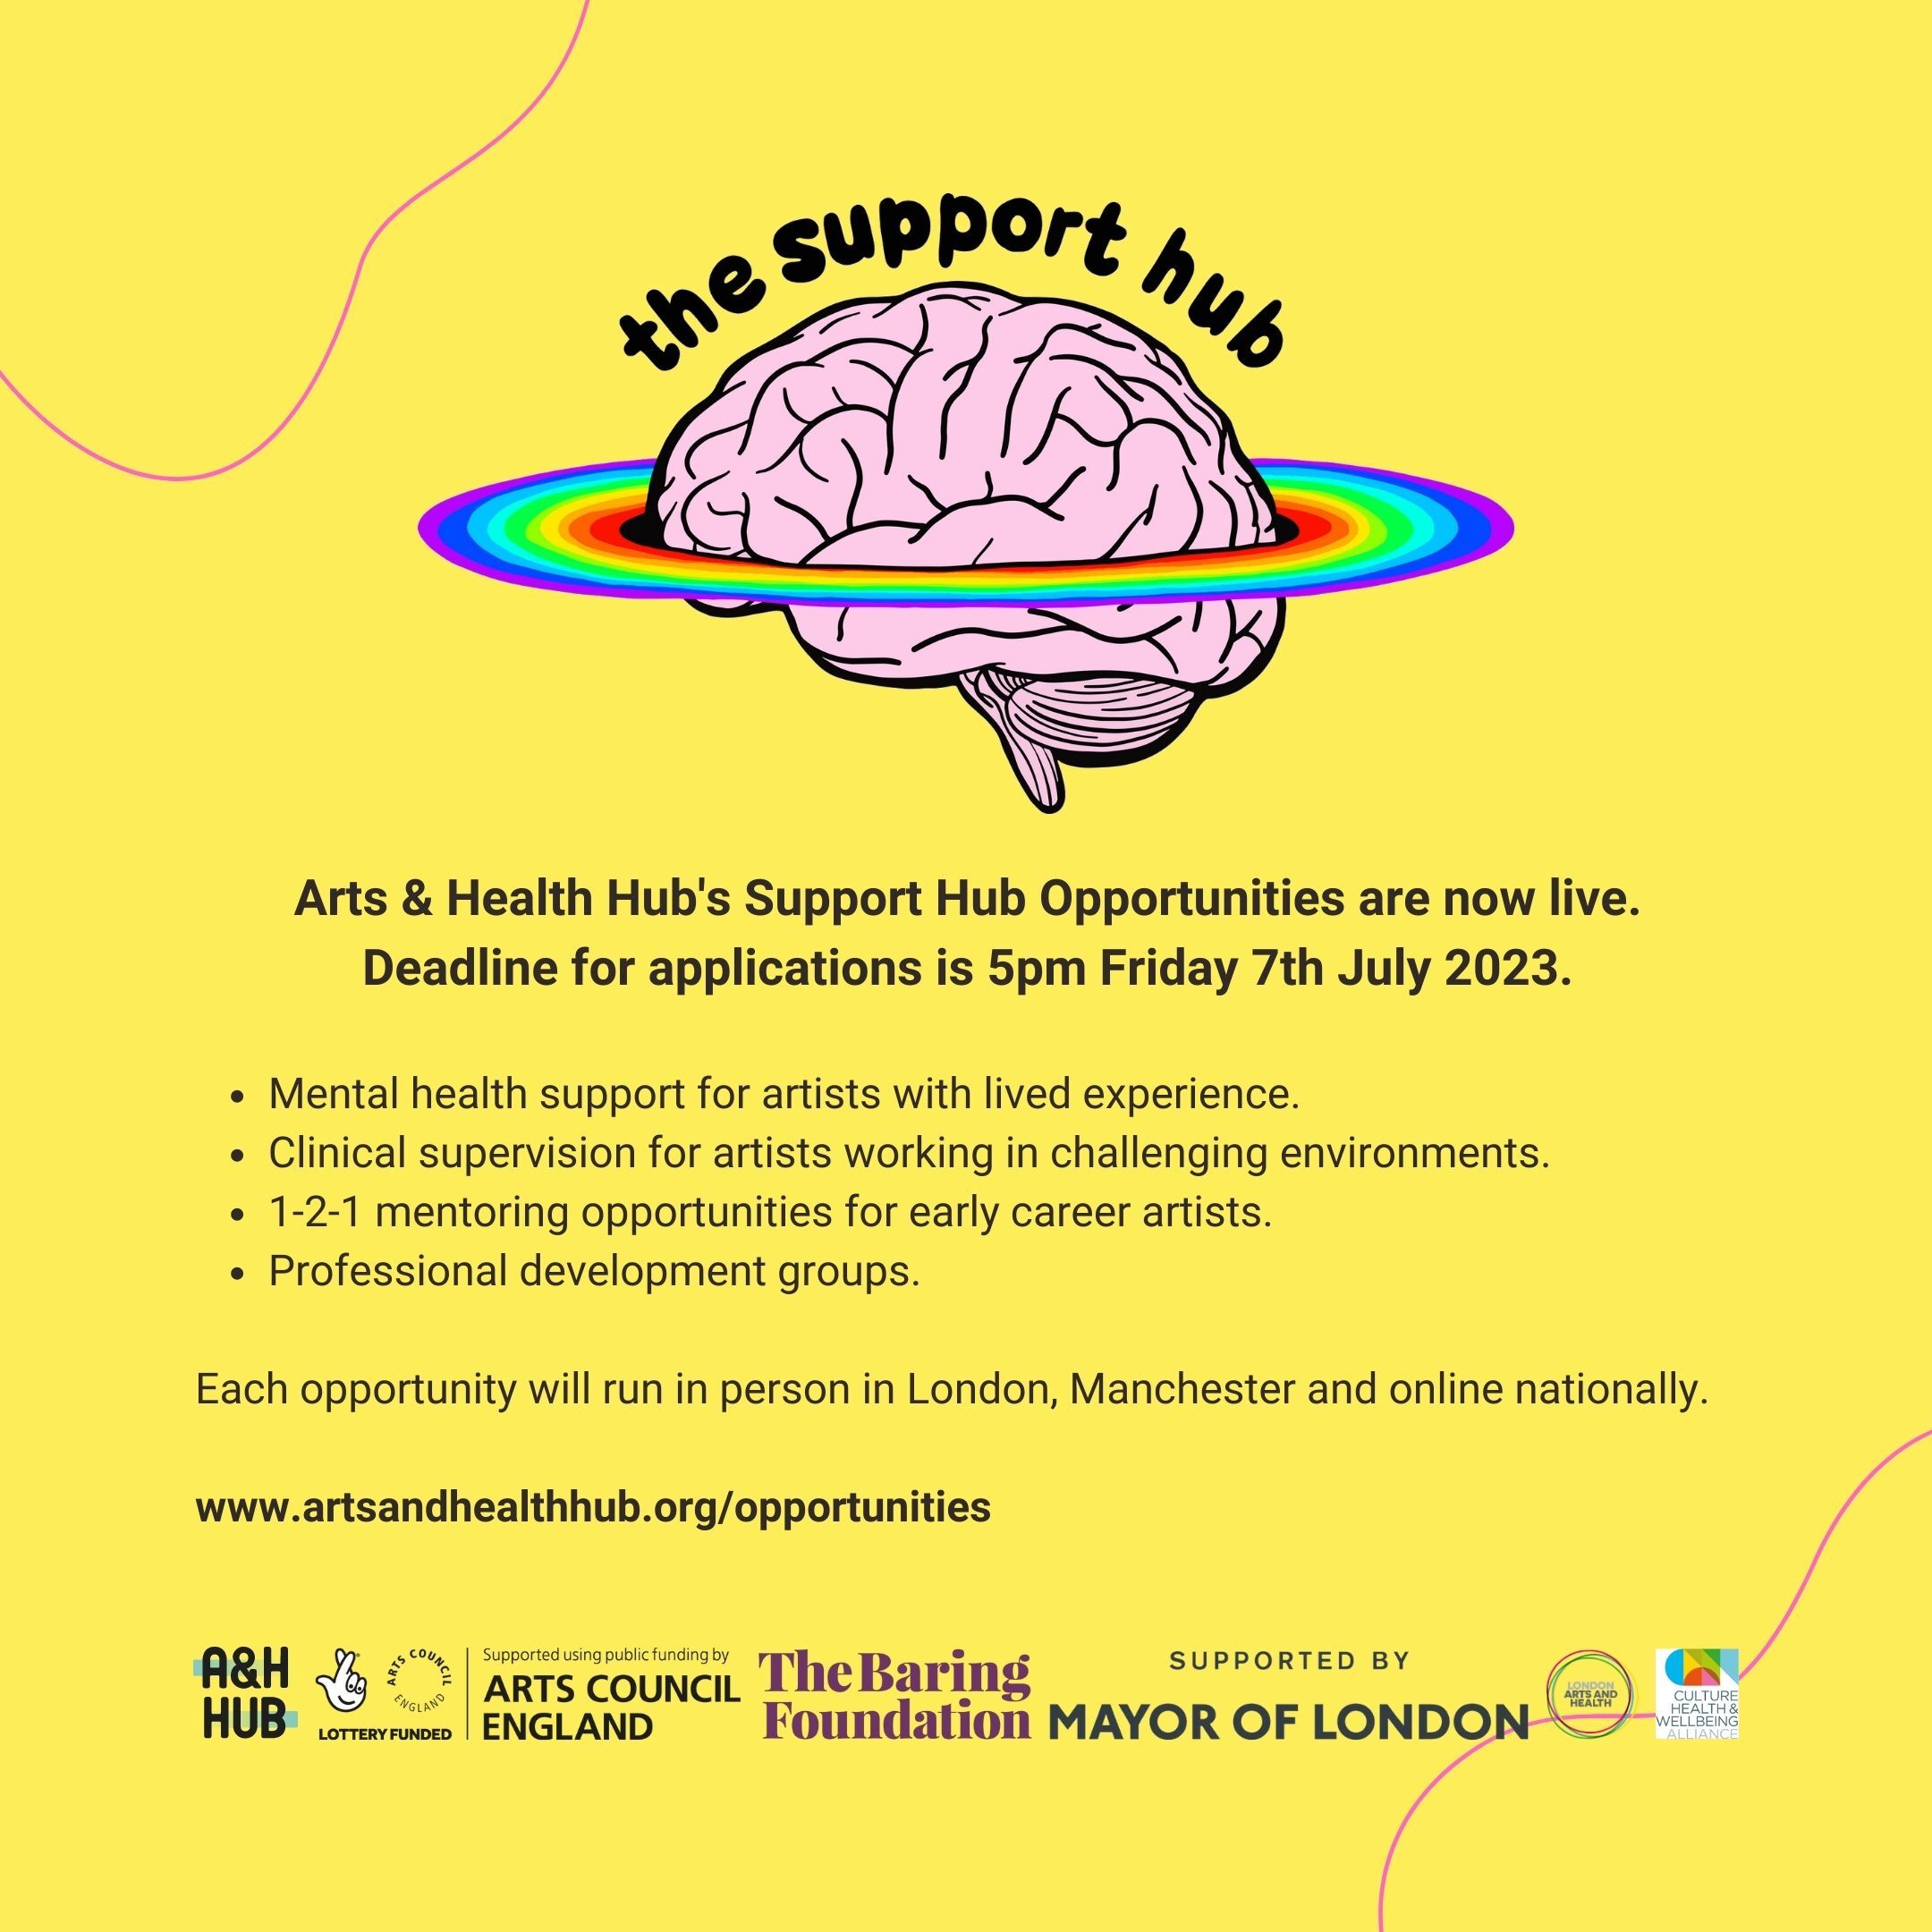 Support Hub Opportunities From Arts & Health Hub